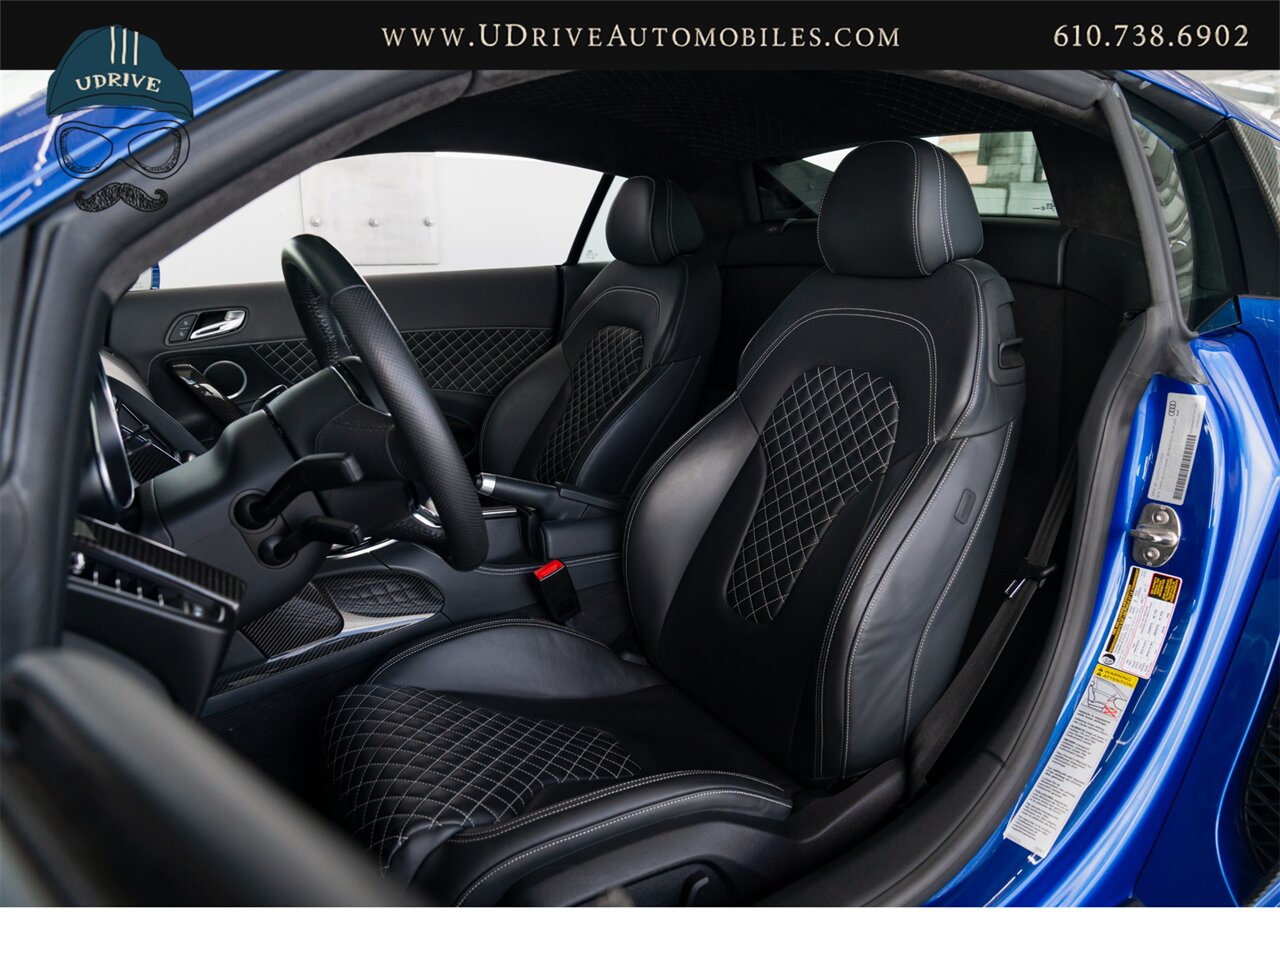 2015 Audi R8 5.2 V10 Quattro 6 Speed Manual 10k Miles  Diamond Stitched Leather 1 of 2 - Photo 5 - West Chester, PA 19382